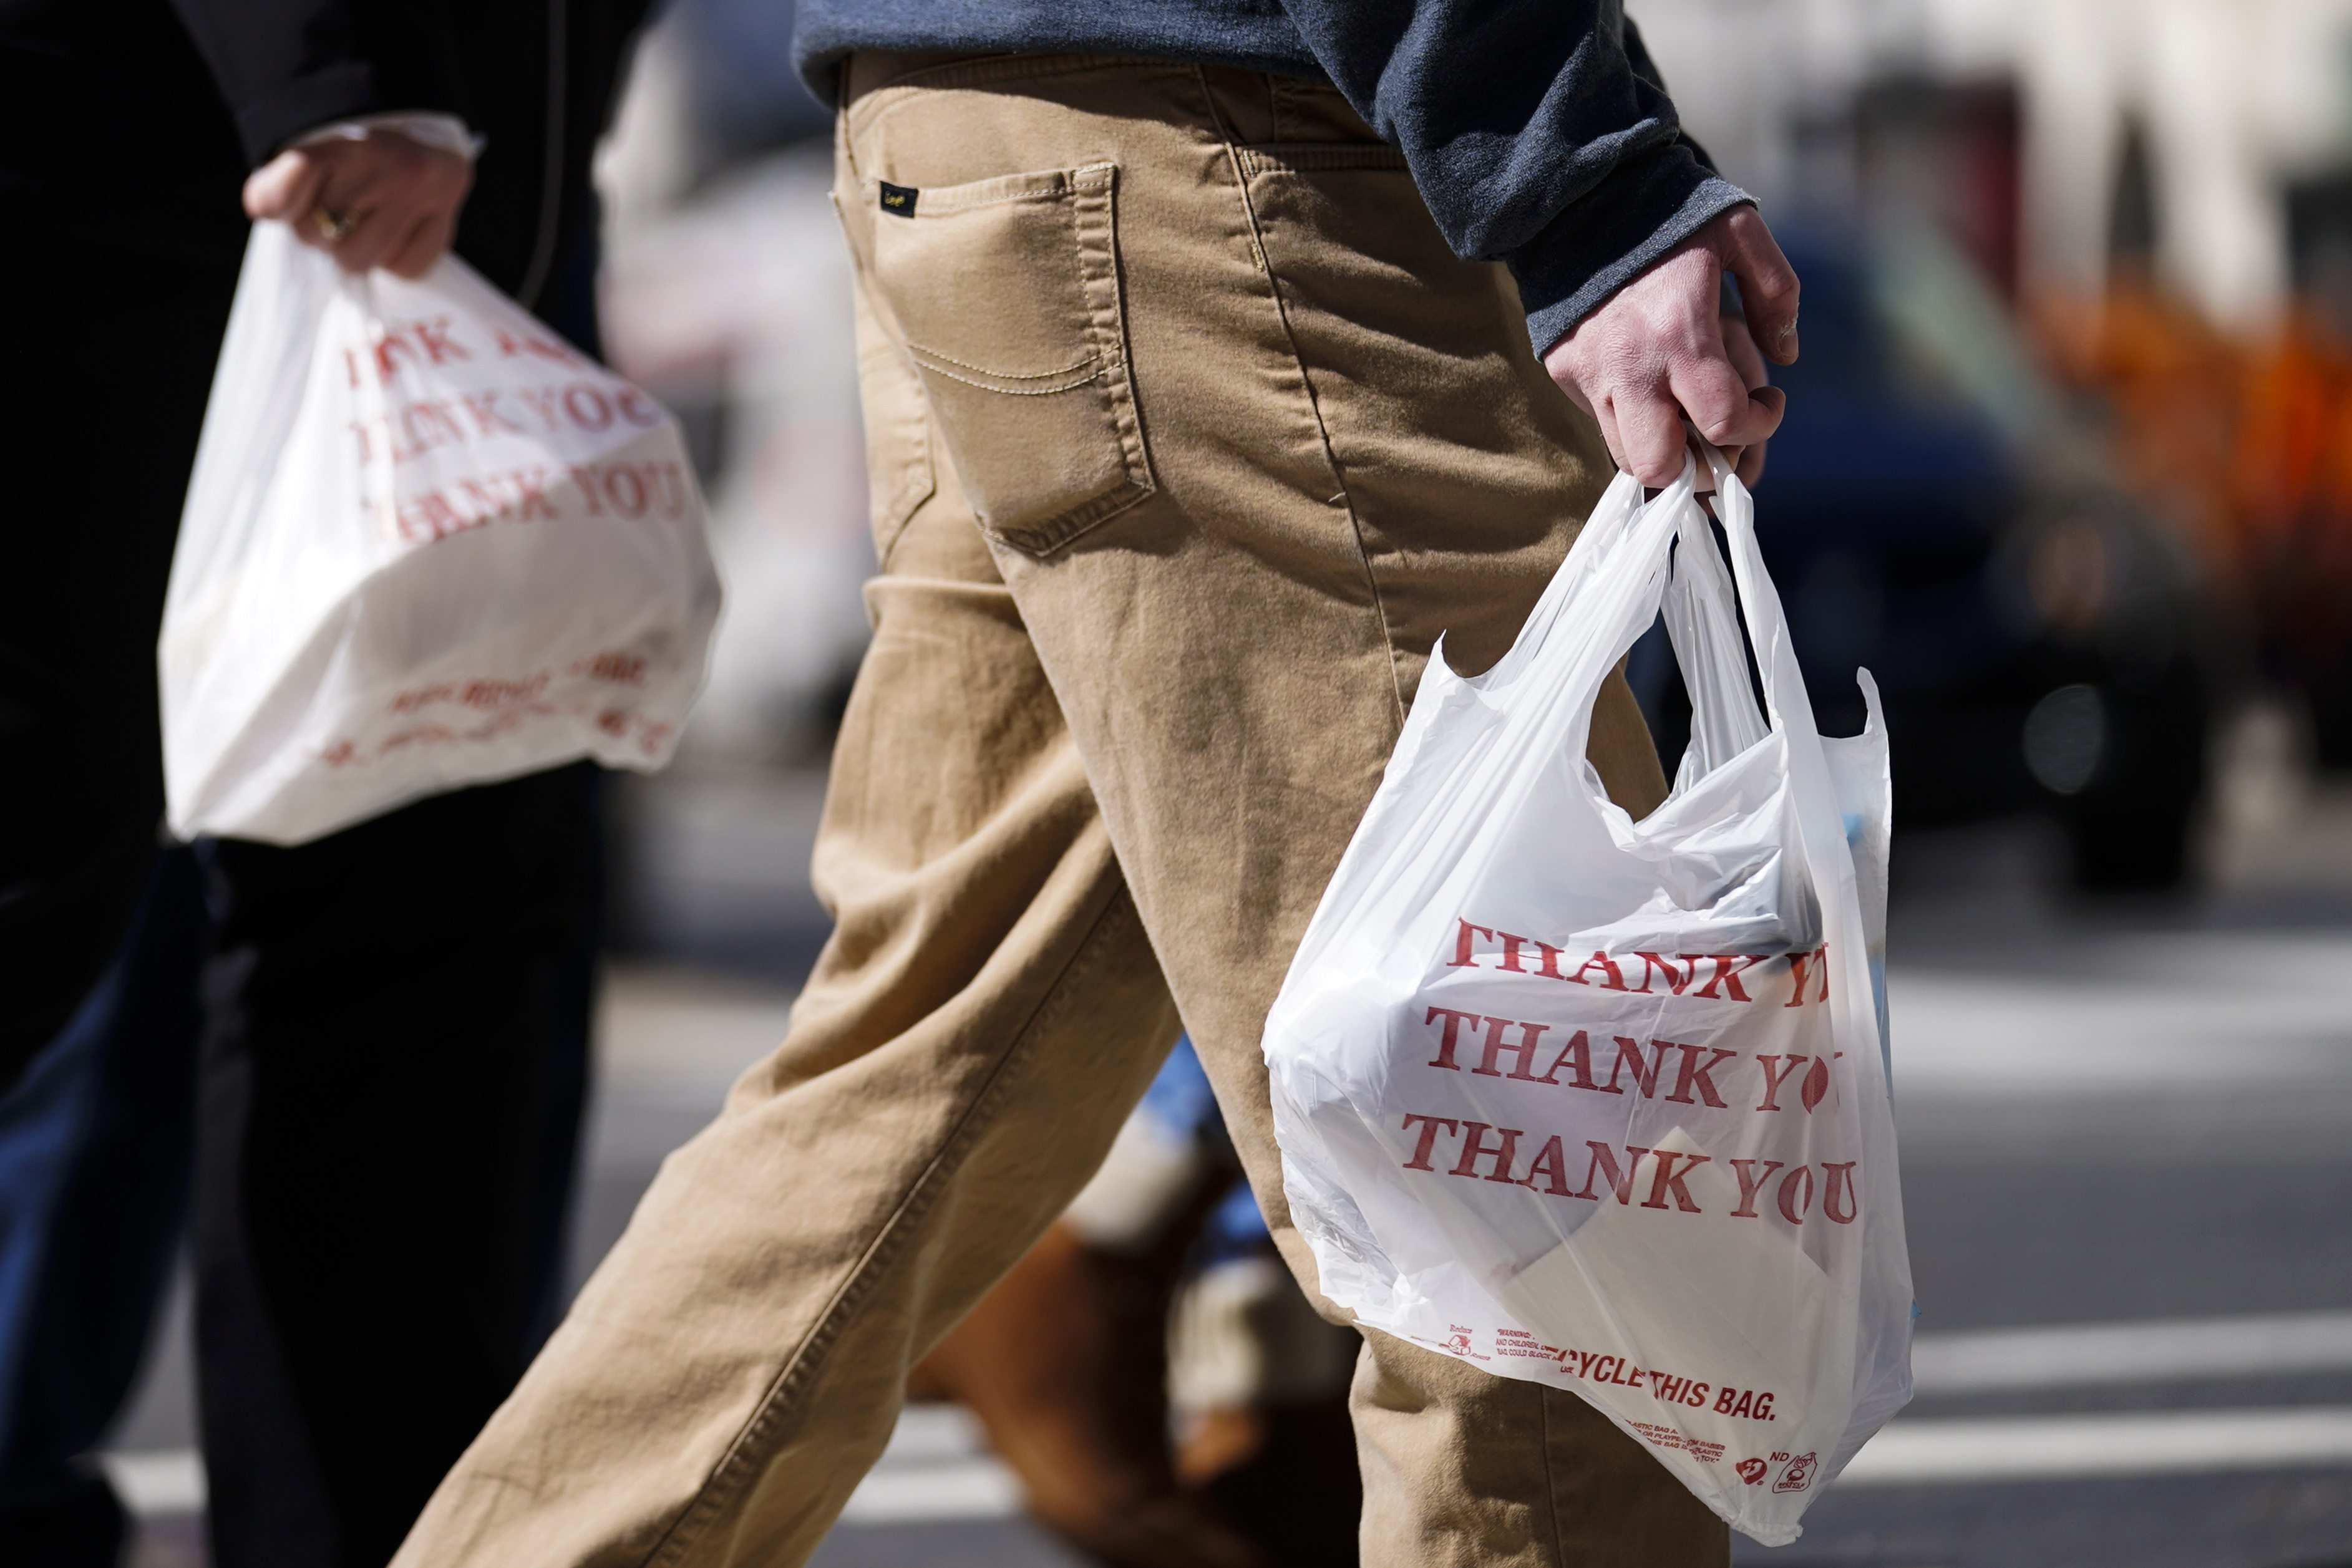 OPINION: Is plastic bag banning productive?